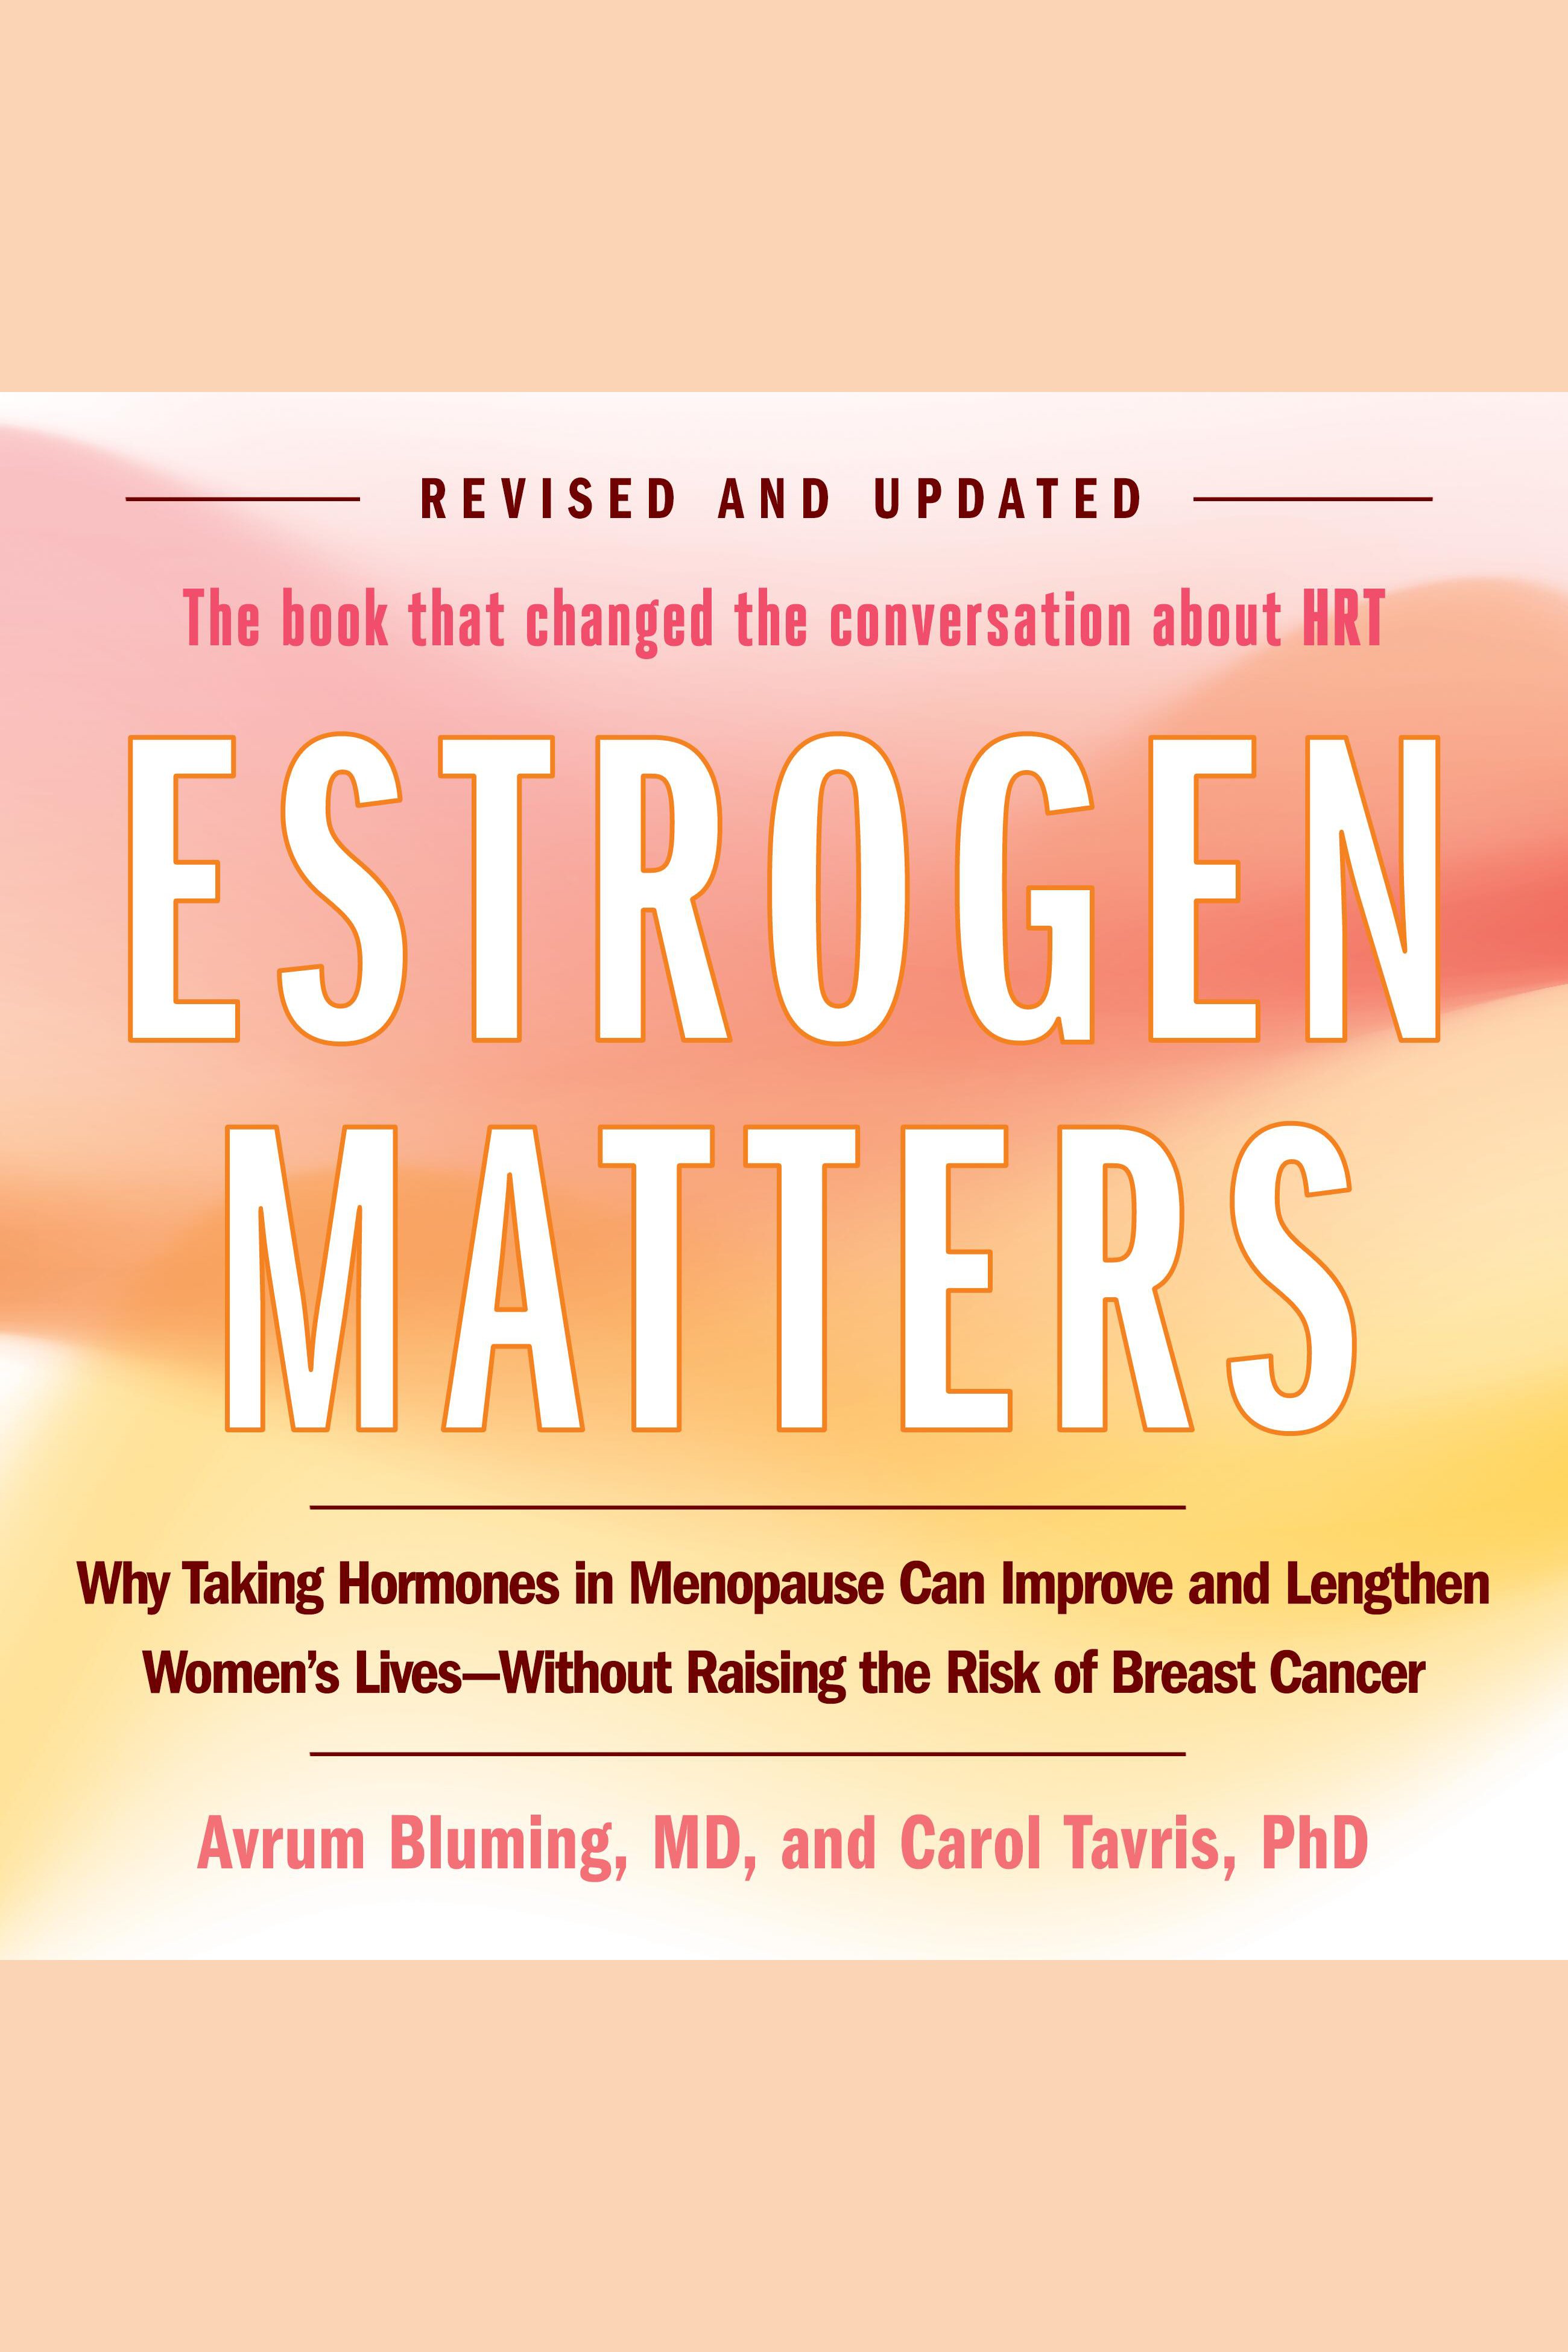 Estrogen Matters Why Taking Hormones in Menopause Can Improve Women's Well-Being and Lengthen Their Lives—Without Raising the Risk of Breast Cancer cover image